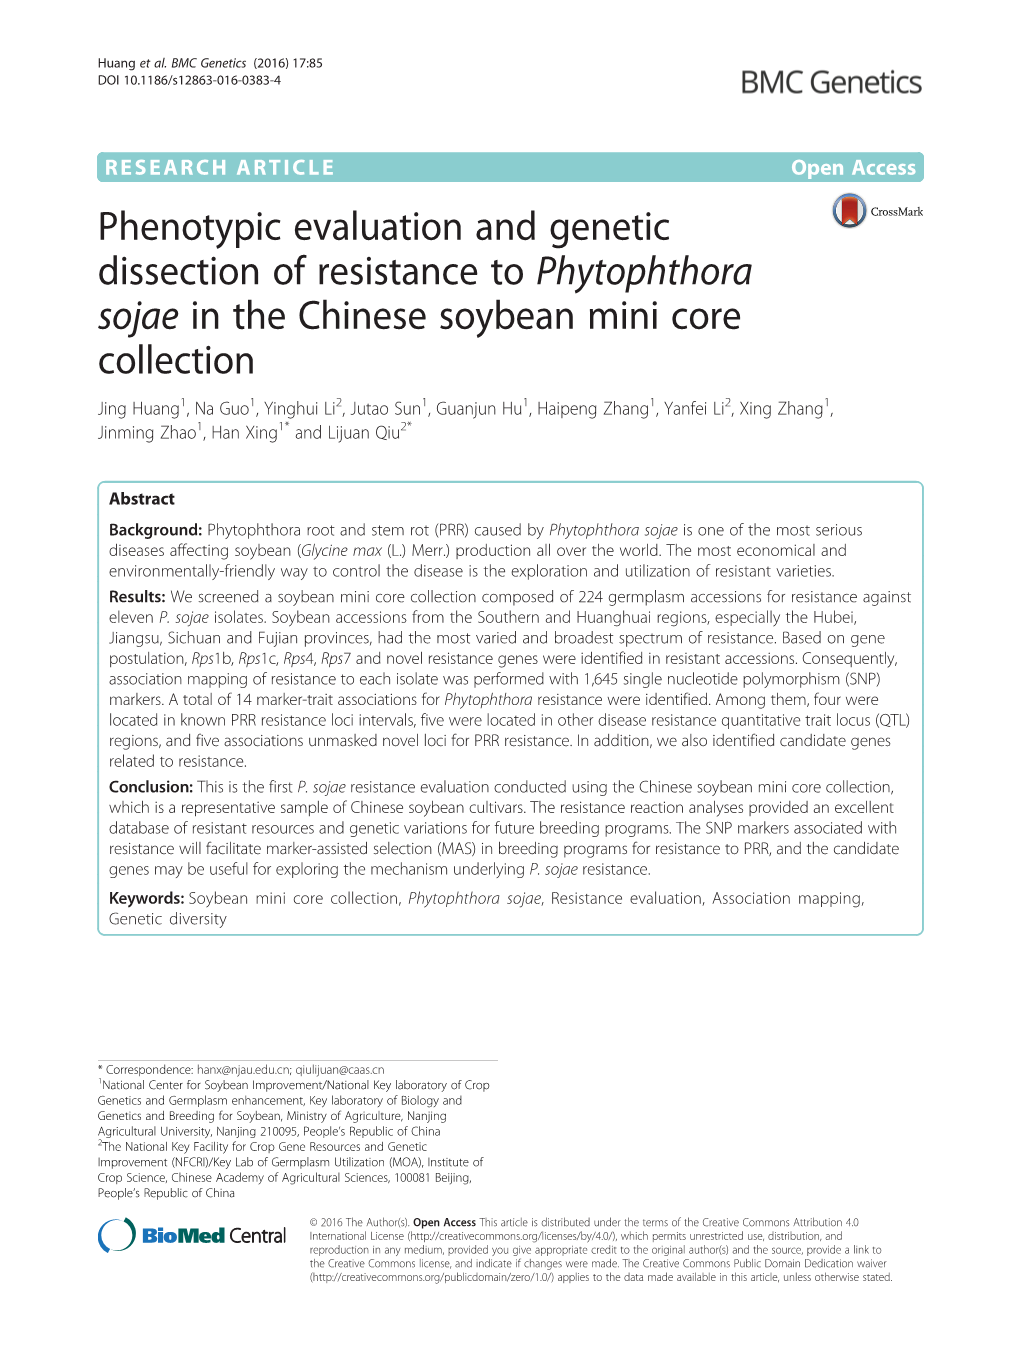 Phenotypic Evaluation and Genetic Dissection of Resistance To